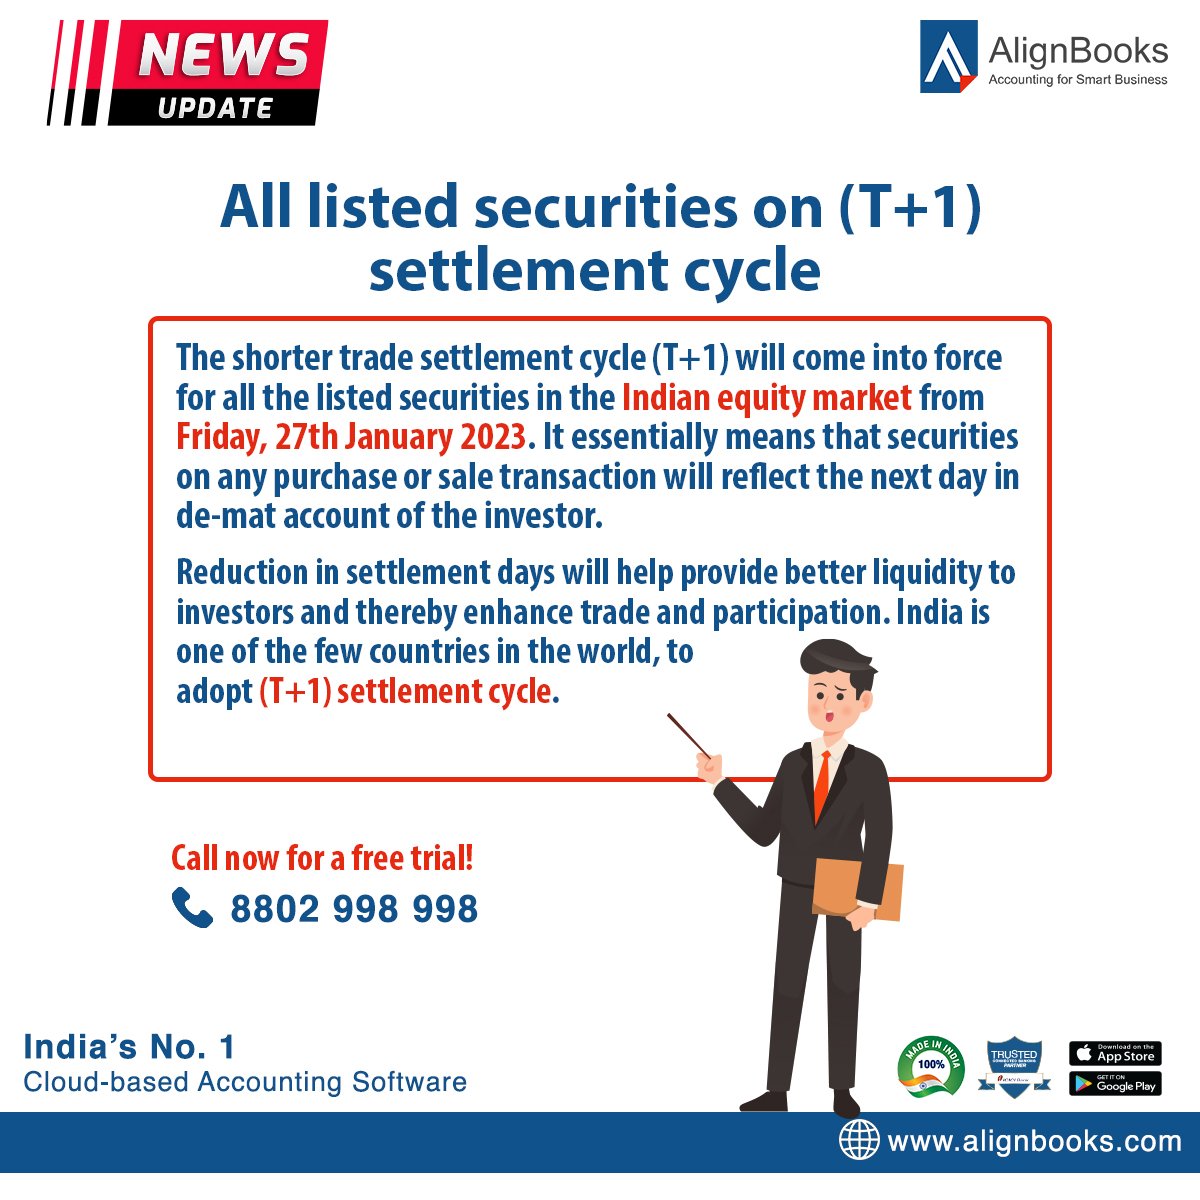 Contact us for more info- 8802998998

Click the link for a free Trial - buff.ly/3J9sEfi

#NSE #TPlus1 #RollingSettlement #EquityMarket #Securities #Derivatives #Circulars #business #invoices #statements #paymentreminders #AlignBooks #AlignWithAlign #OnlyOnAlignBooks #ERP